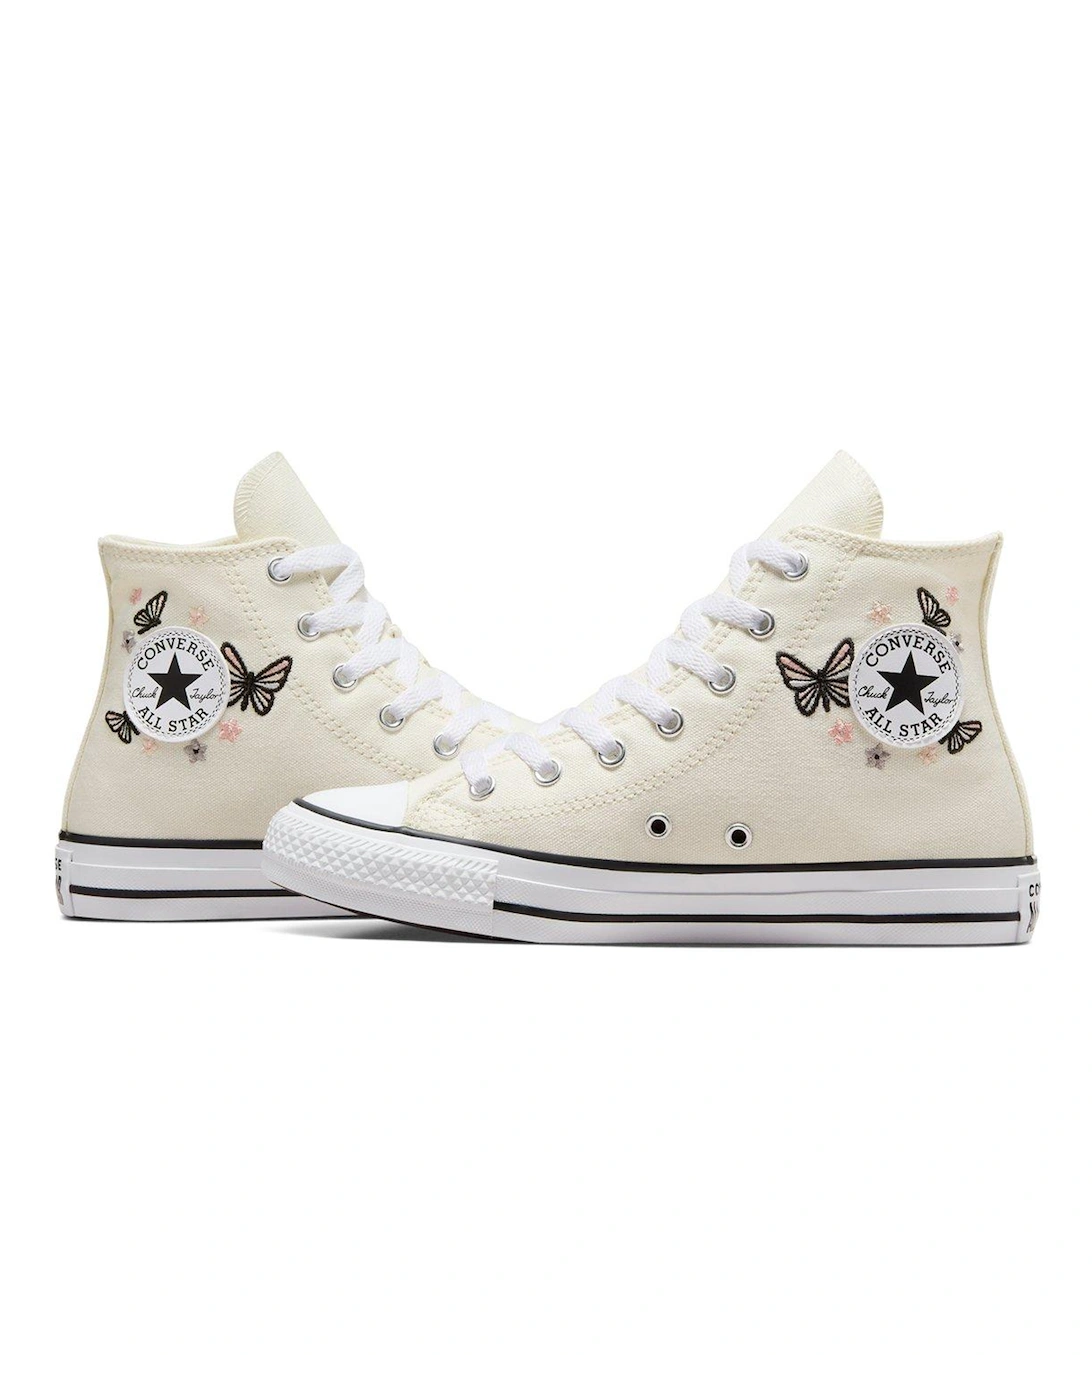 Junior Girls Festival High Tops Trainers - Off White